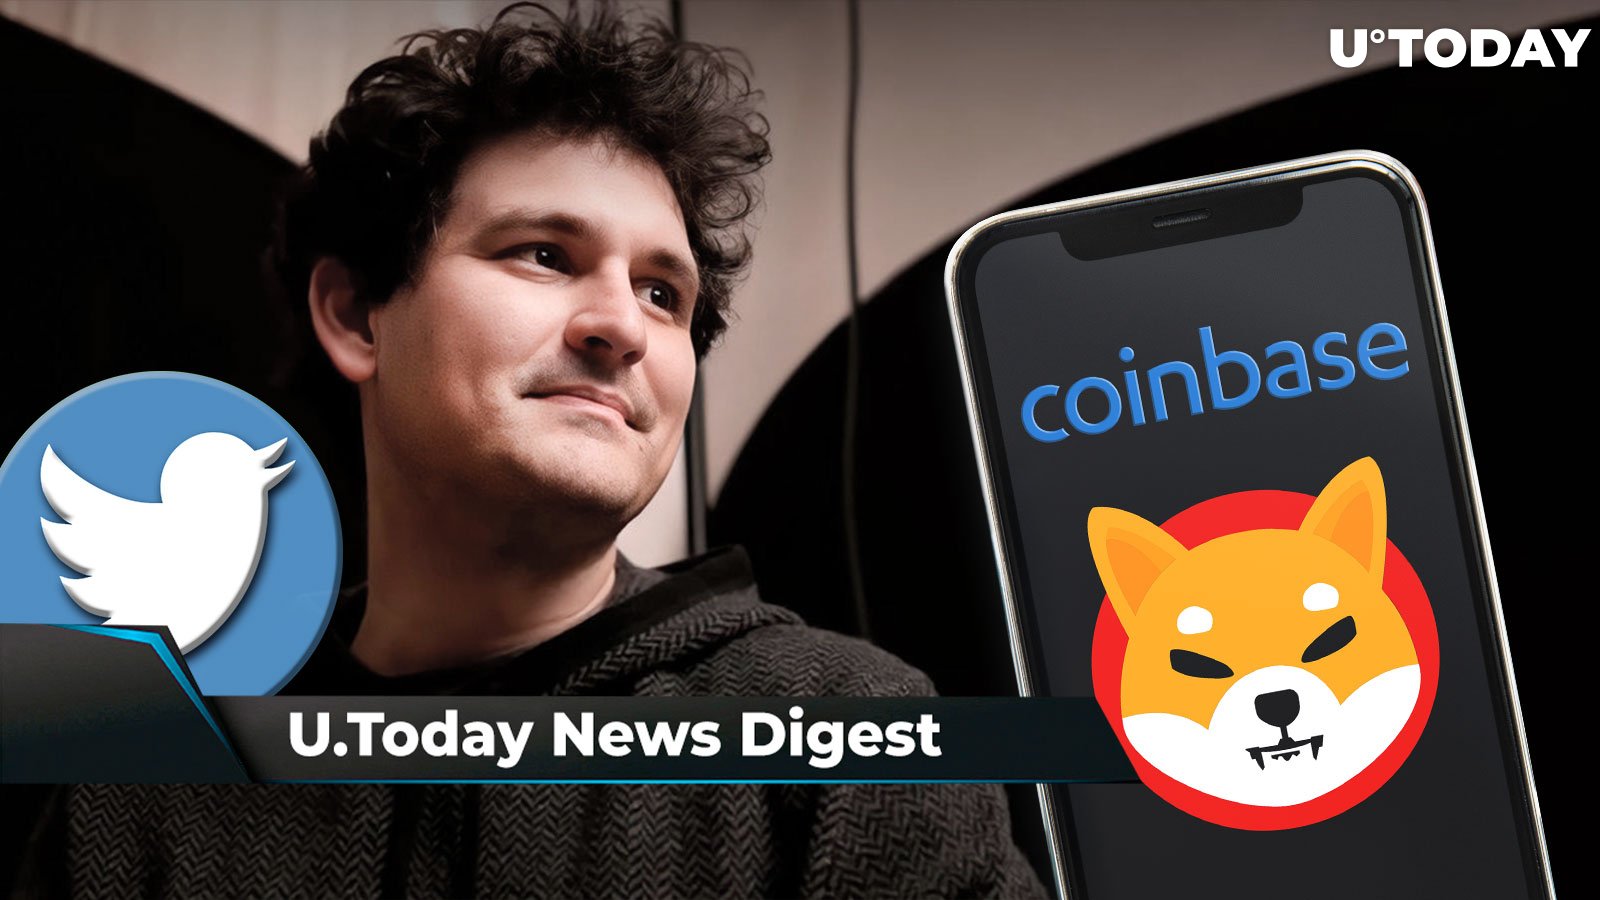 Ripple Reported to Settle with SEC, FTX CEO Posts Mysterious Tweets, Over Trillion SHIB Moved to Coinbase: Crypto News Digest by U.Today